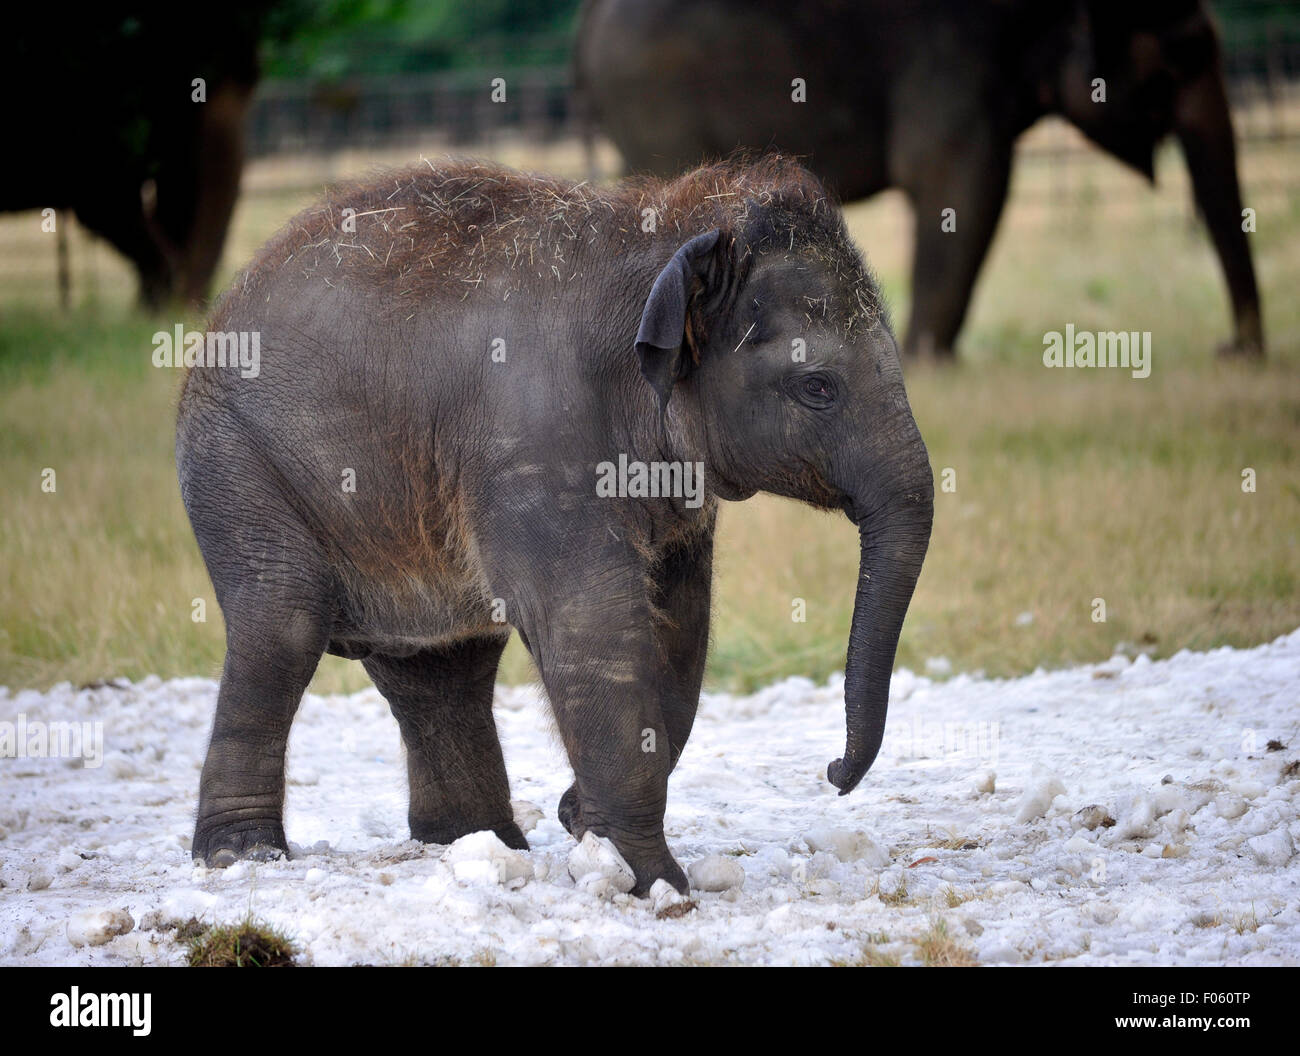 As the summer scorcher continues to sweep the country, ZSL Whipsnade Zoo’s elephants  beat the heat with delivery  of snow Stock Photo